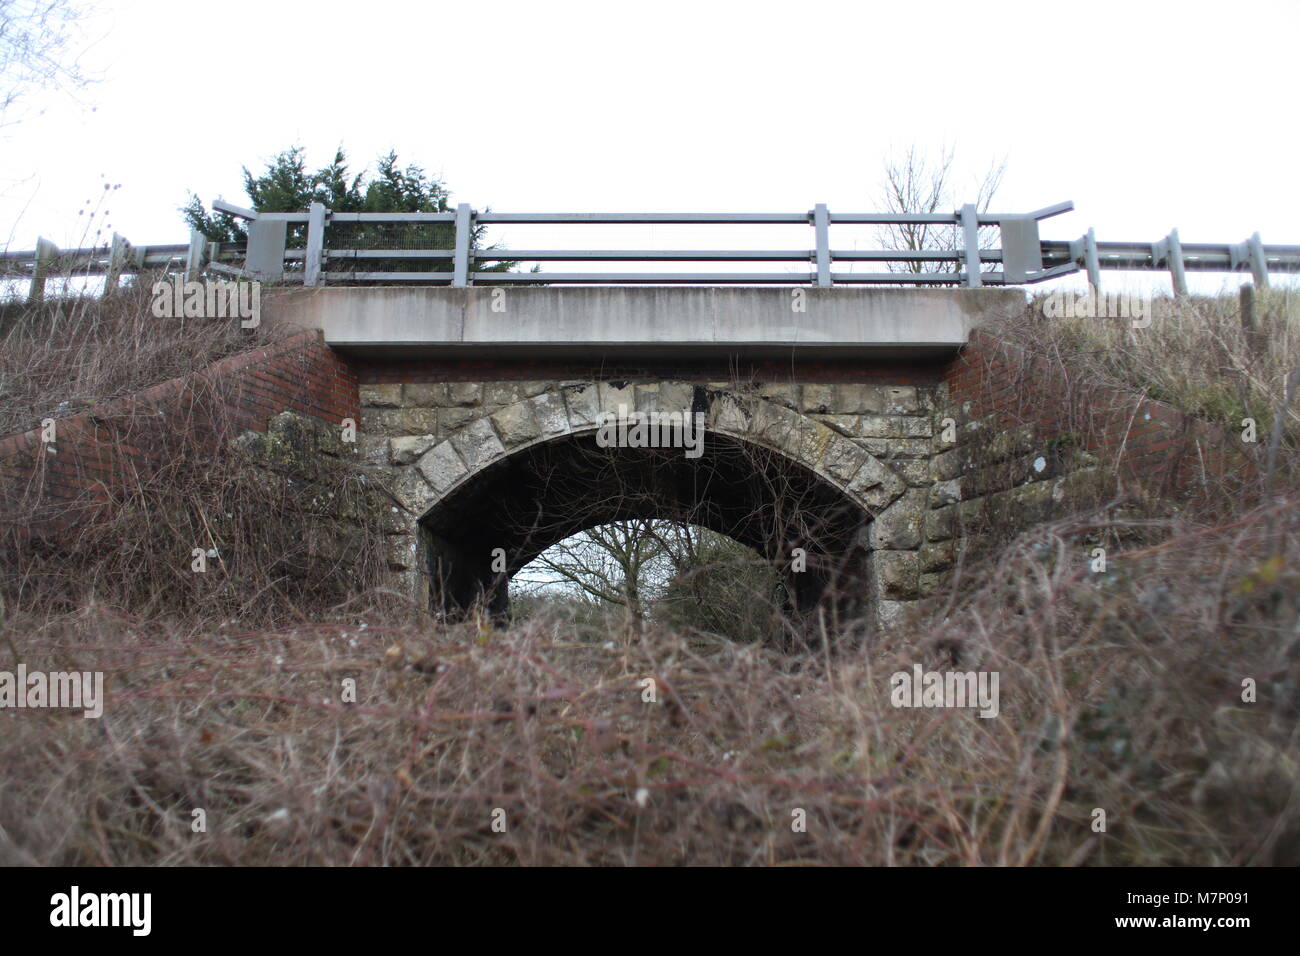 Old Henstridge railway bridge, trains on the Somerset and Dorset line would have travelled under to get to Henstridge station (where photographer is) Stock Photo